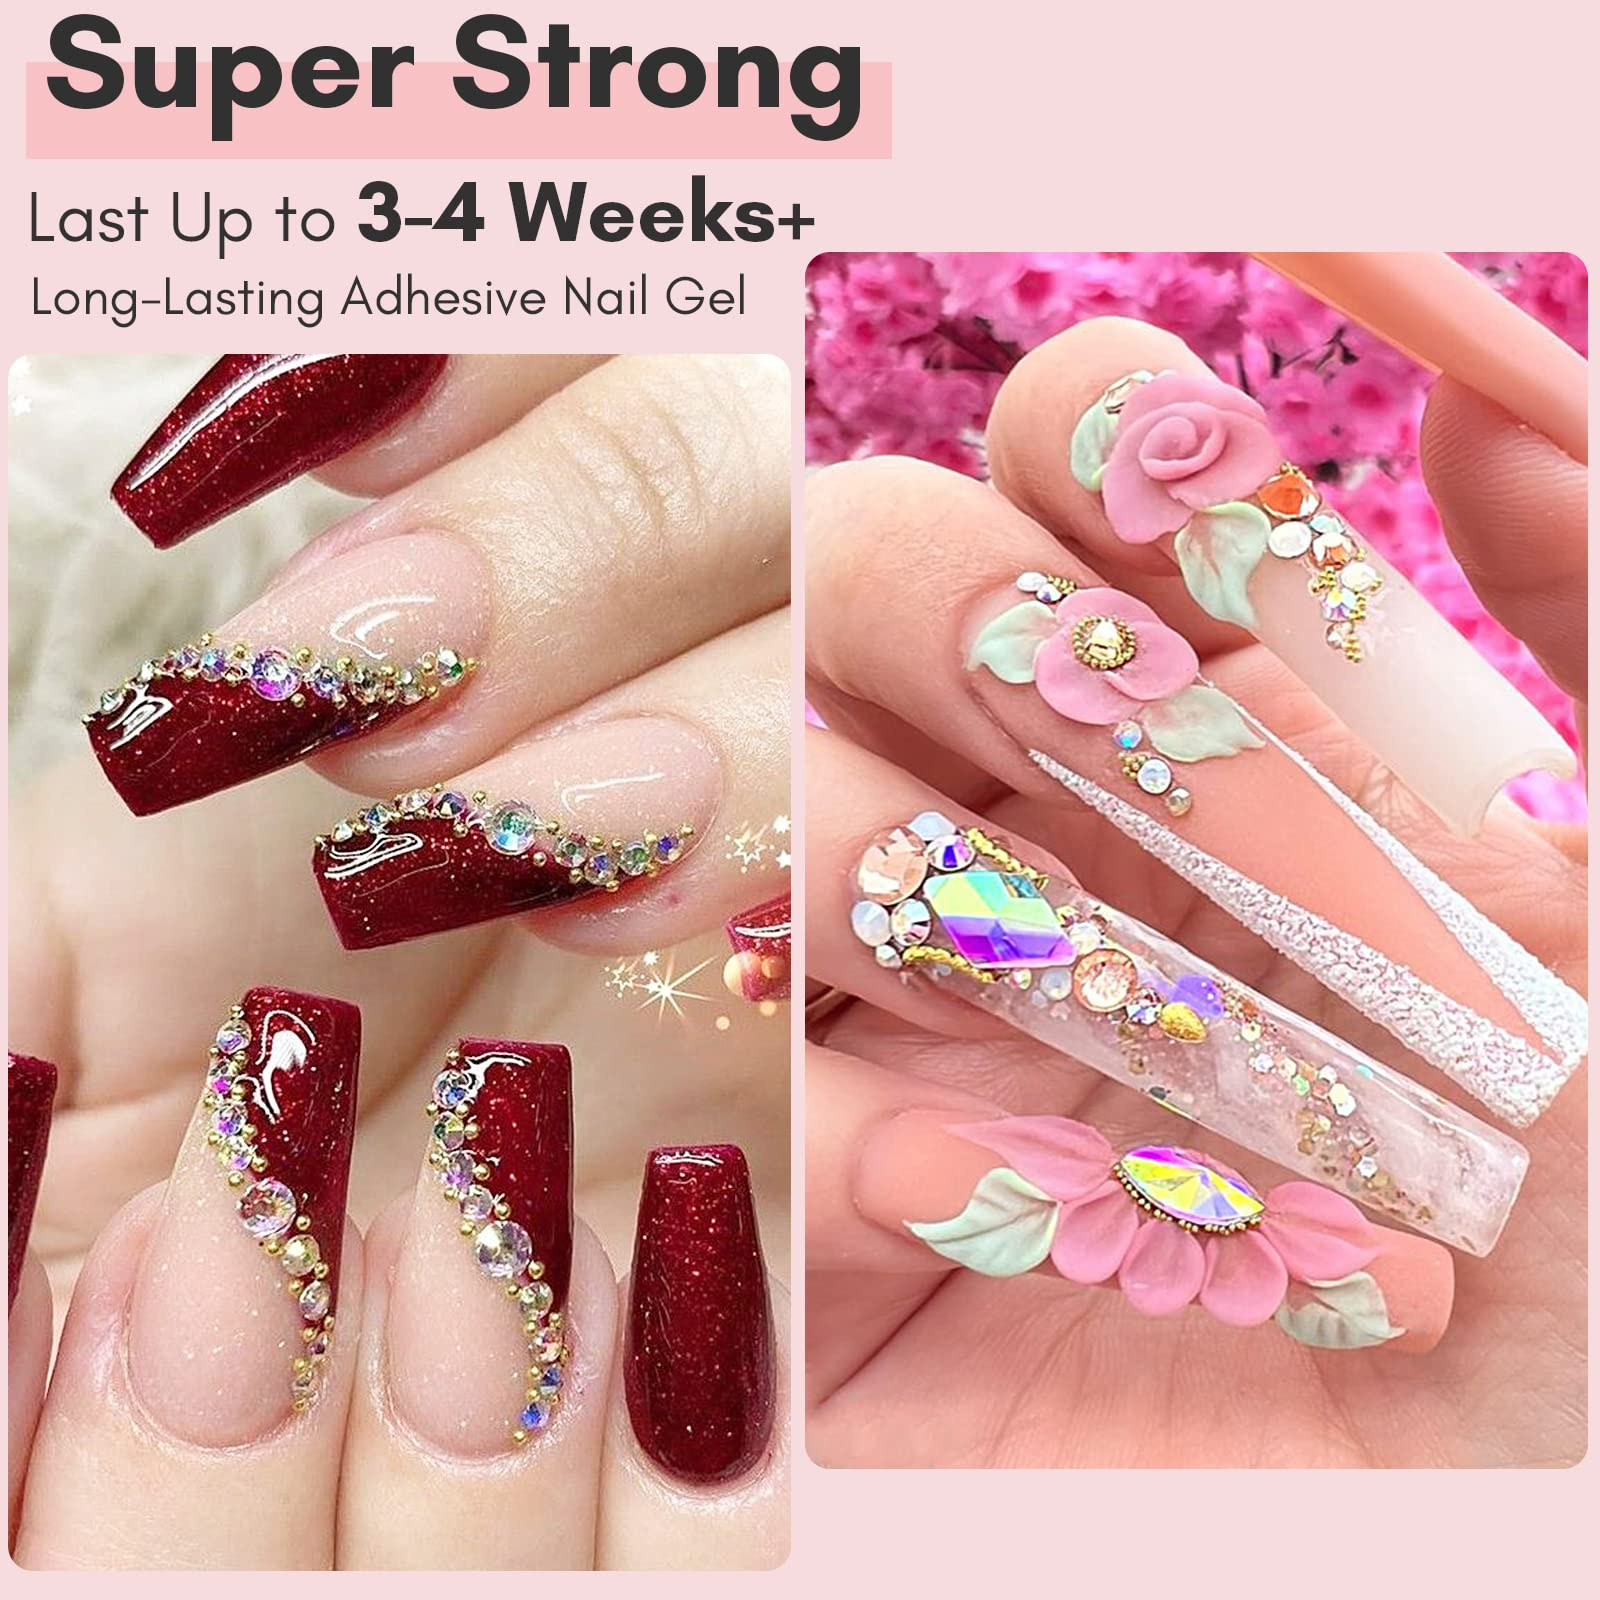 pack White AB Nail Rhinestones Horse EyeWaterdropCrystal Glitter Nail Stones  DIY 3d Design Art Decorations1899370 From Bmiv, $23.29